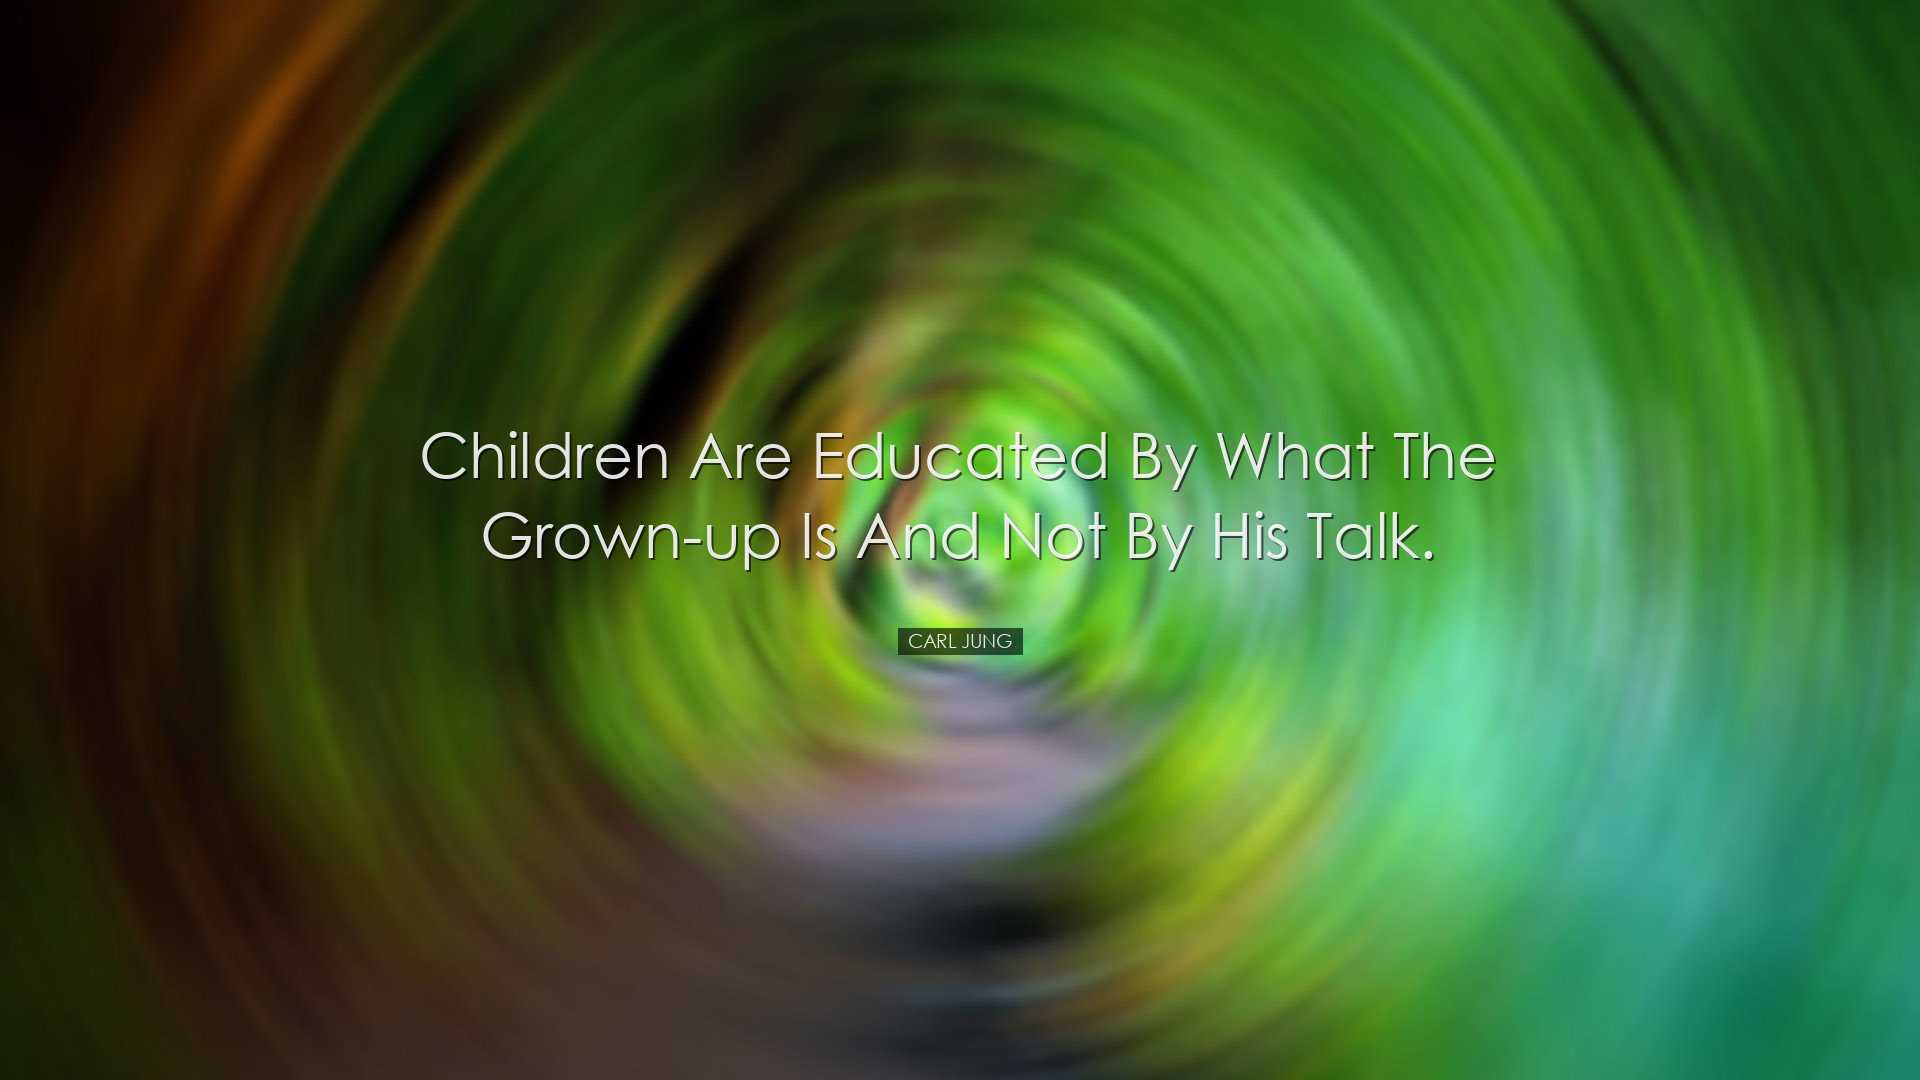 Children are educated by what the grown-up is and not by his talk.